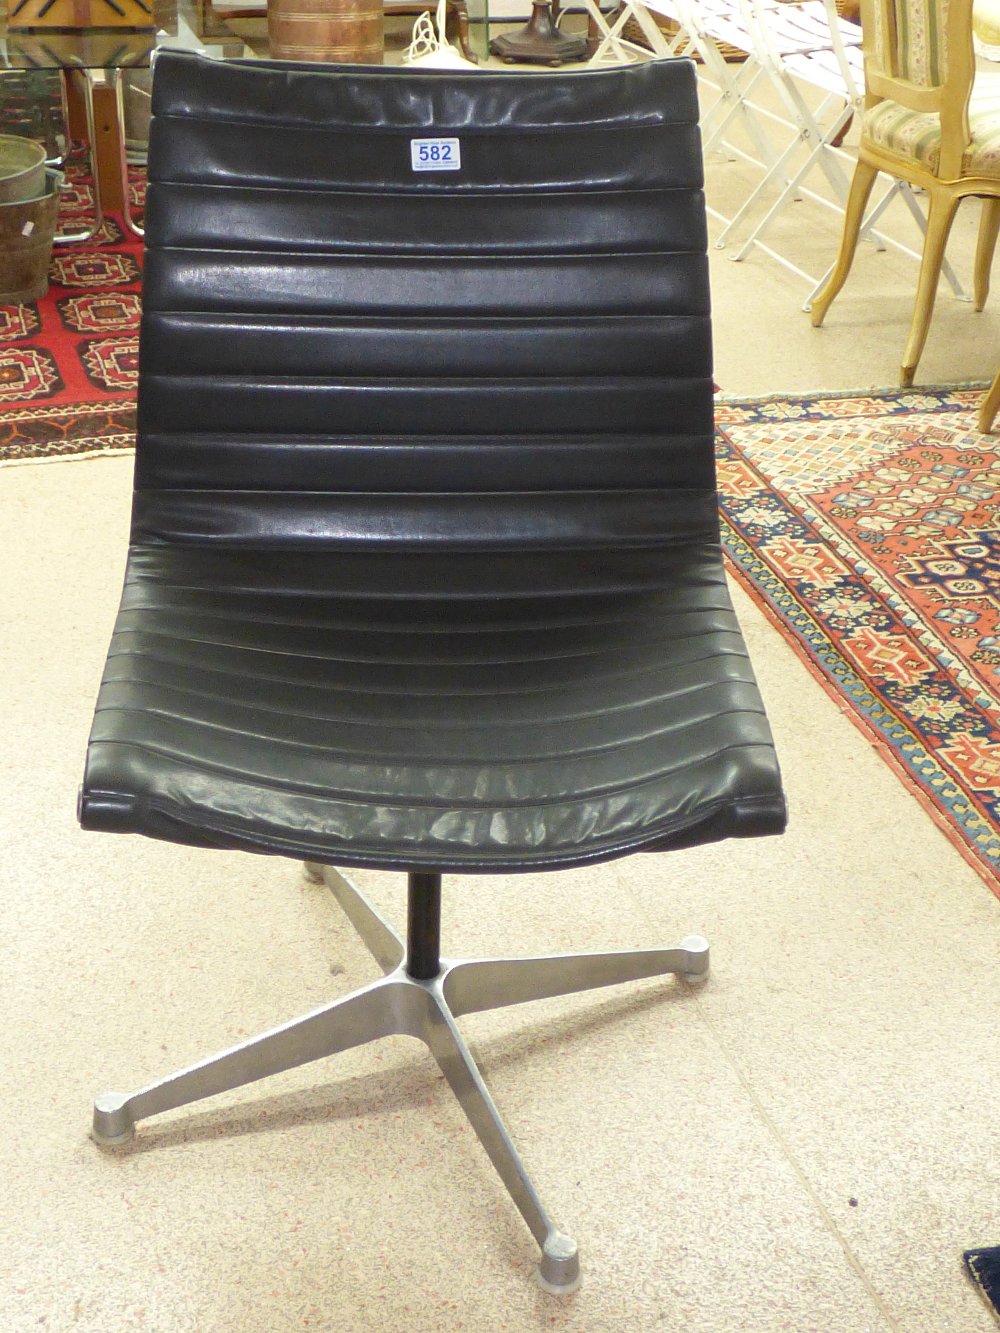 MID CENTURY HERMAN MILLER CHARLES EAMES CHAIR - Image 2 of 7